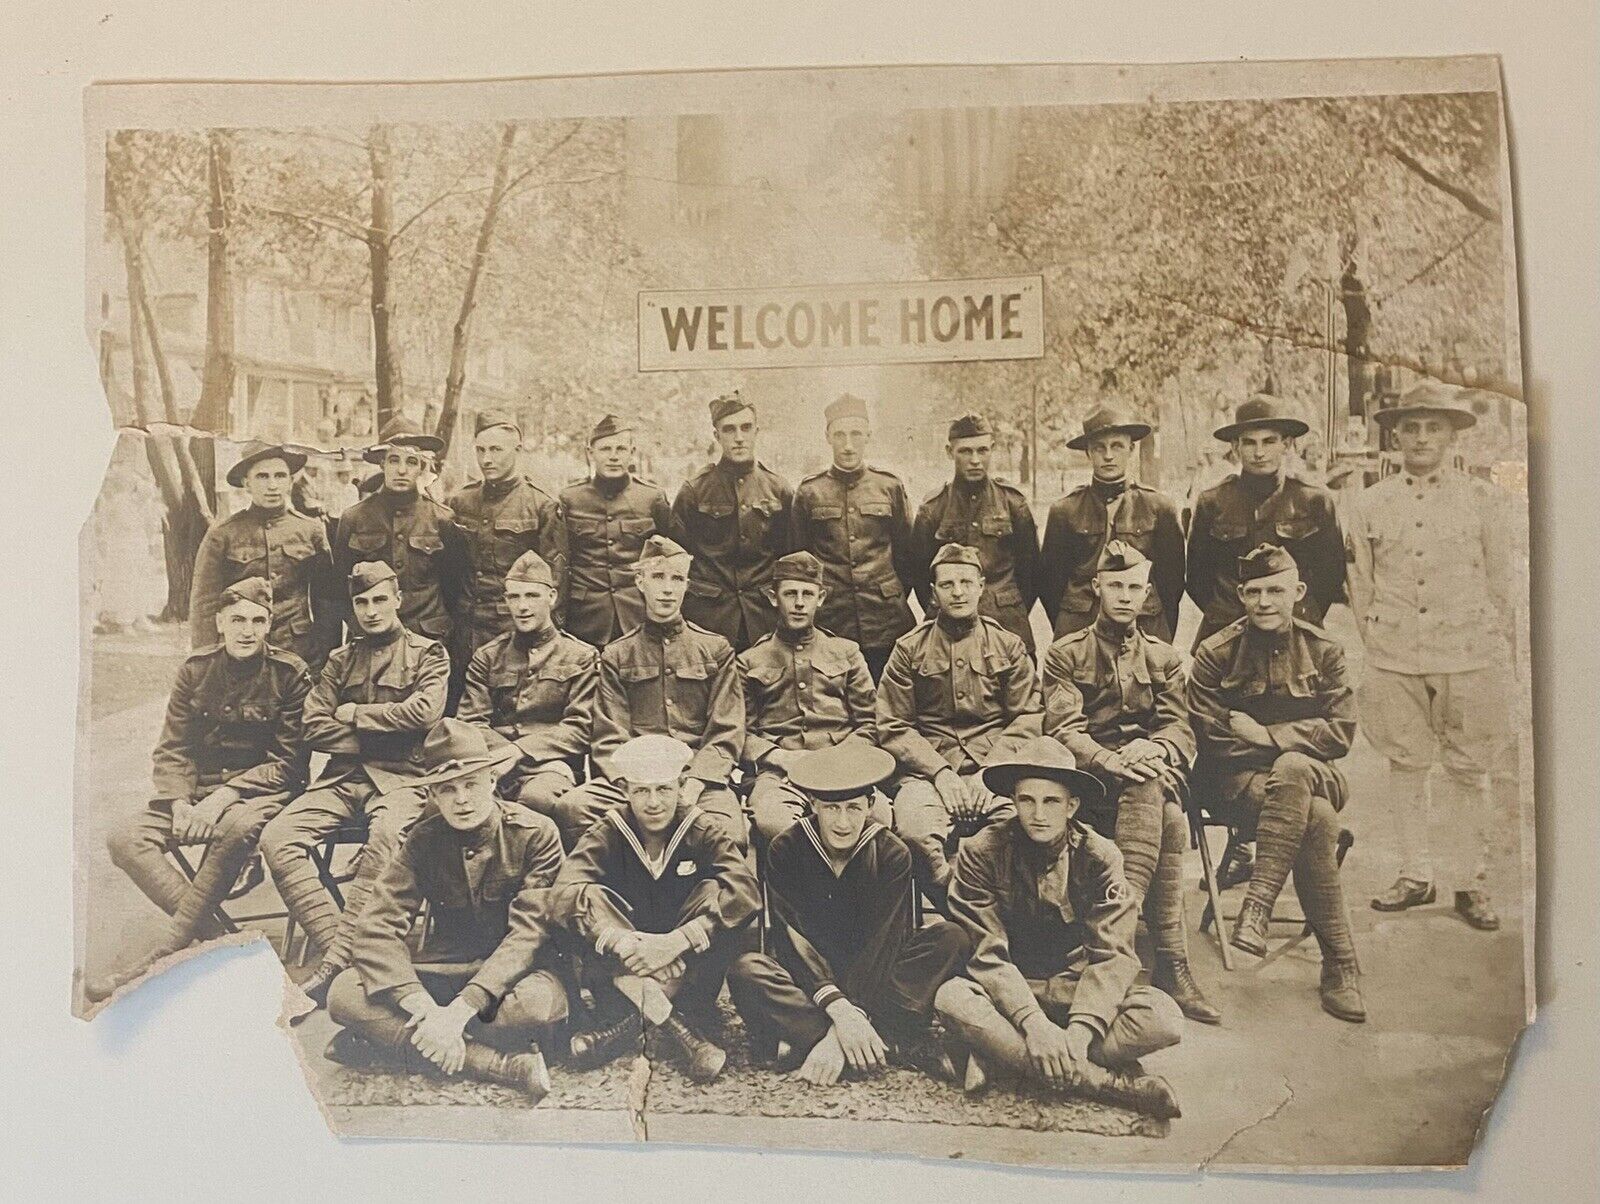 WWI American - Soldiers Welcome Home Vintage Original Military Photo 1917